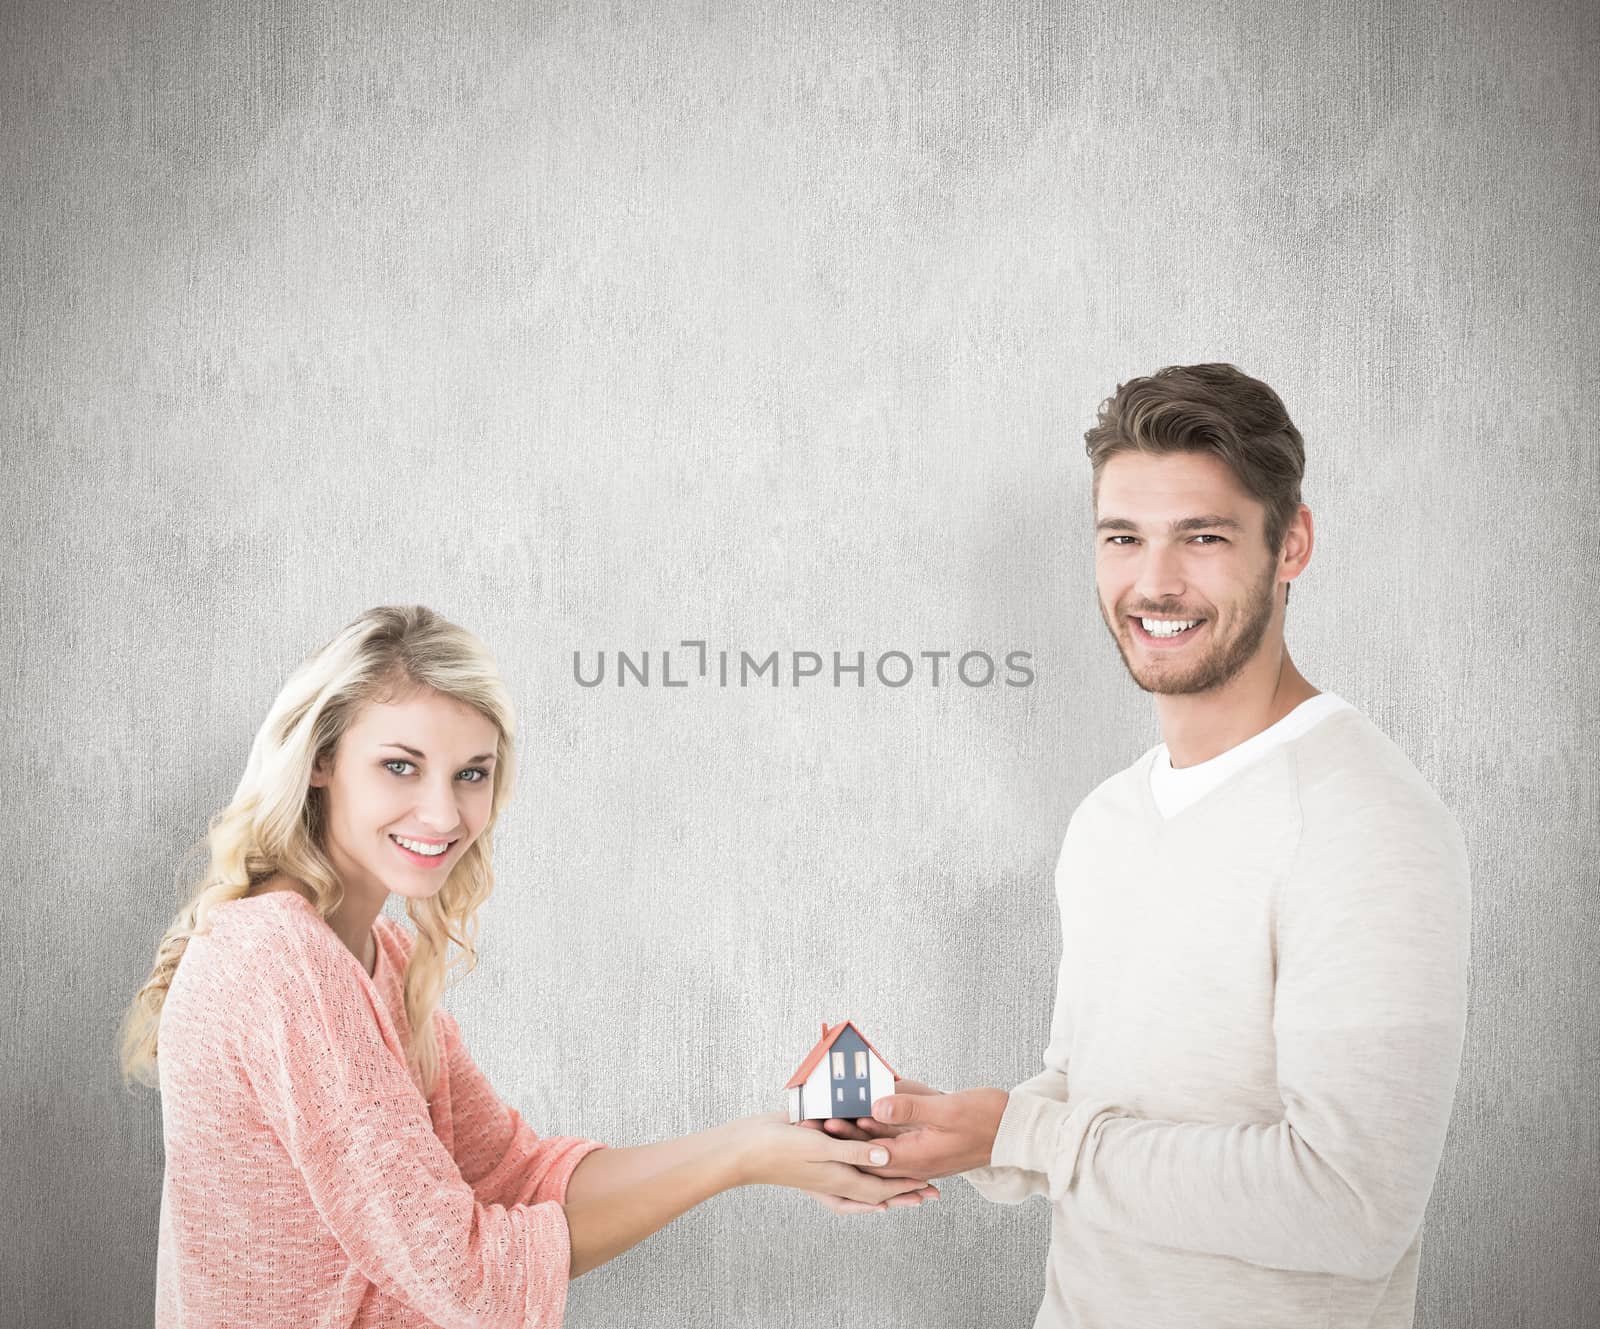 Attractive couple holding miniature house model against white background